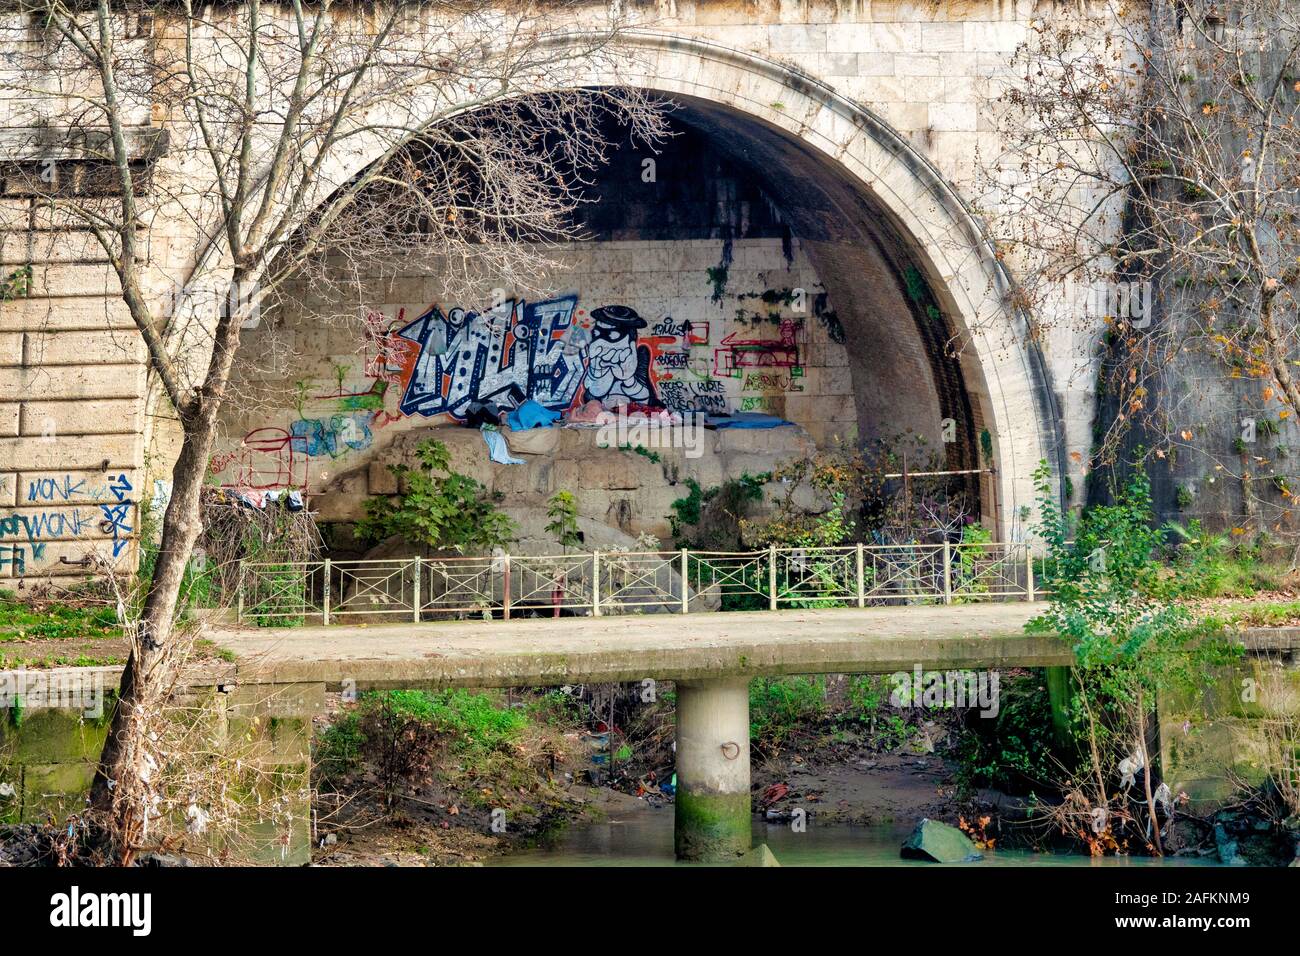 The outfall of the Cloaca Maxima (the greatest sewer), one of the world's earliest sewage systems, Rome Italy. Stock Photo